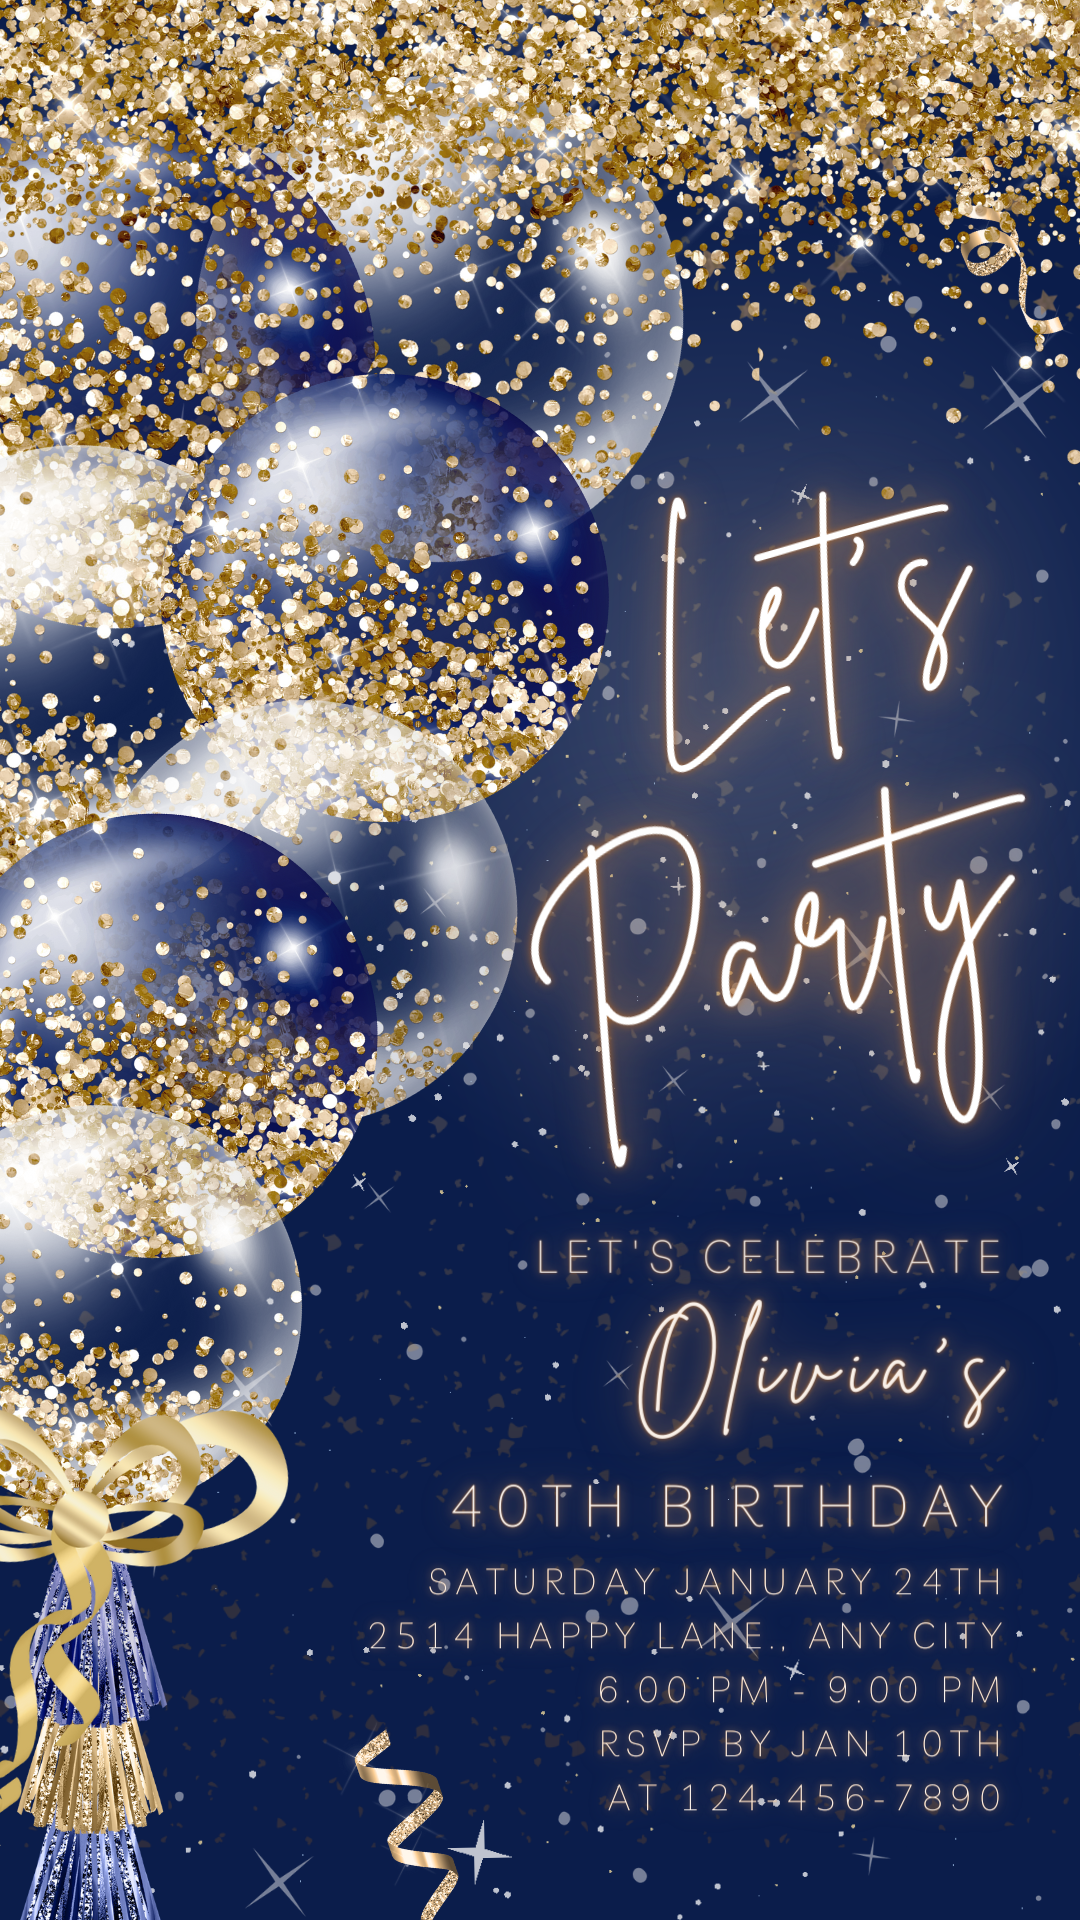 Animated Let's Party Invite for any Event Celebration, Editable Video Template, Birthday invitation for any Age | Blue Navy & Gold E-vite